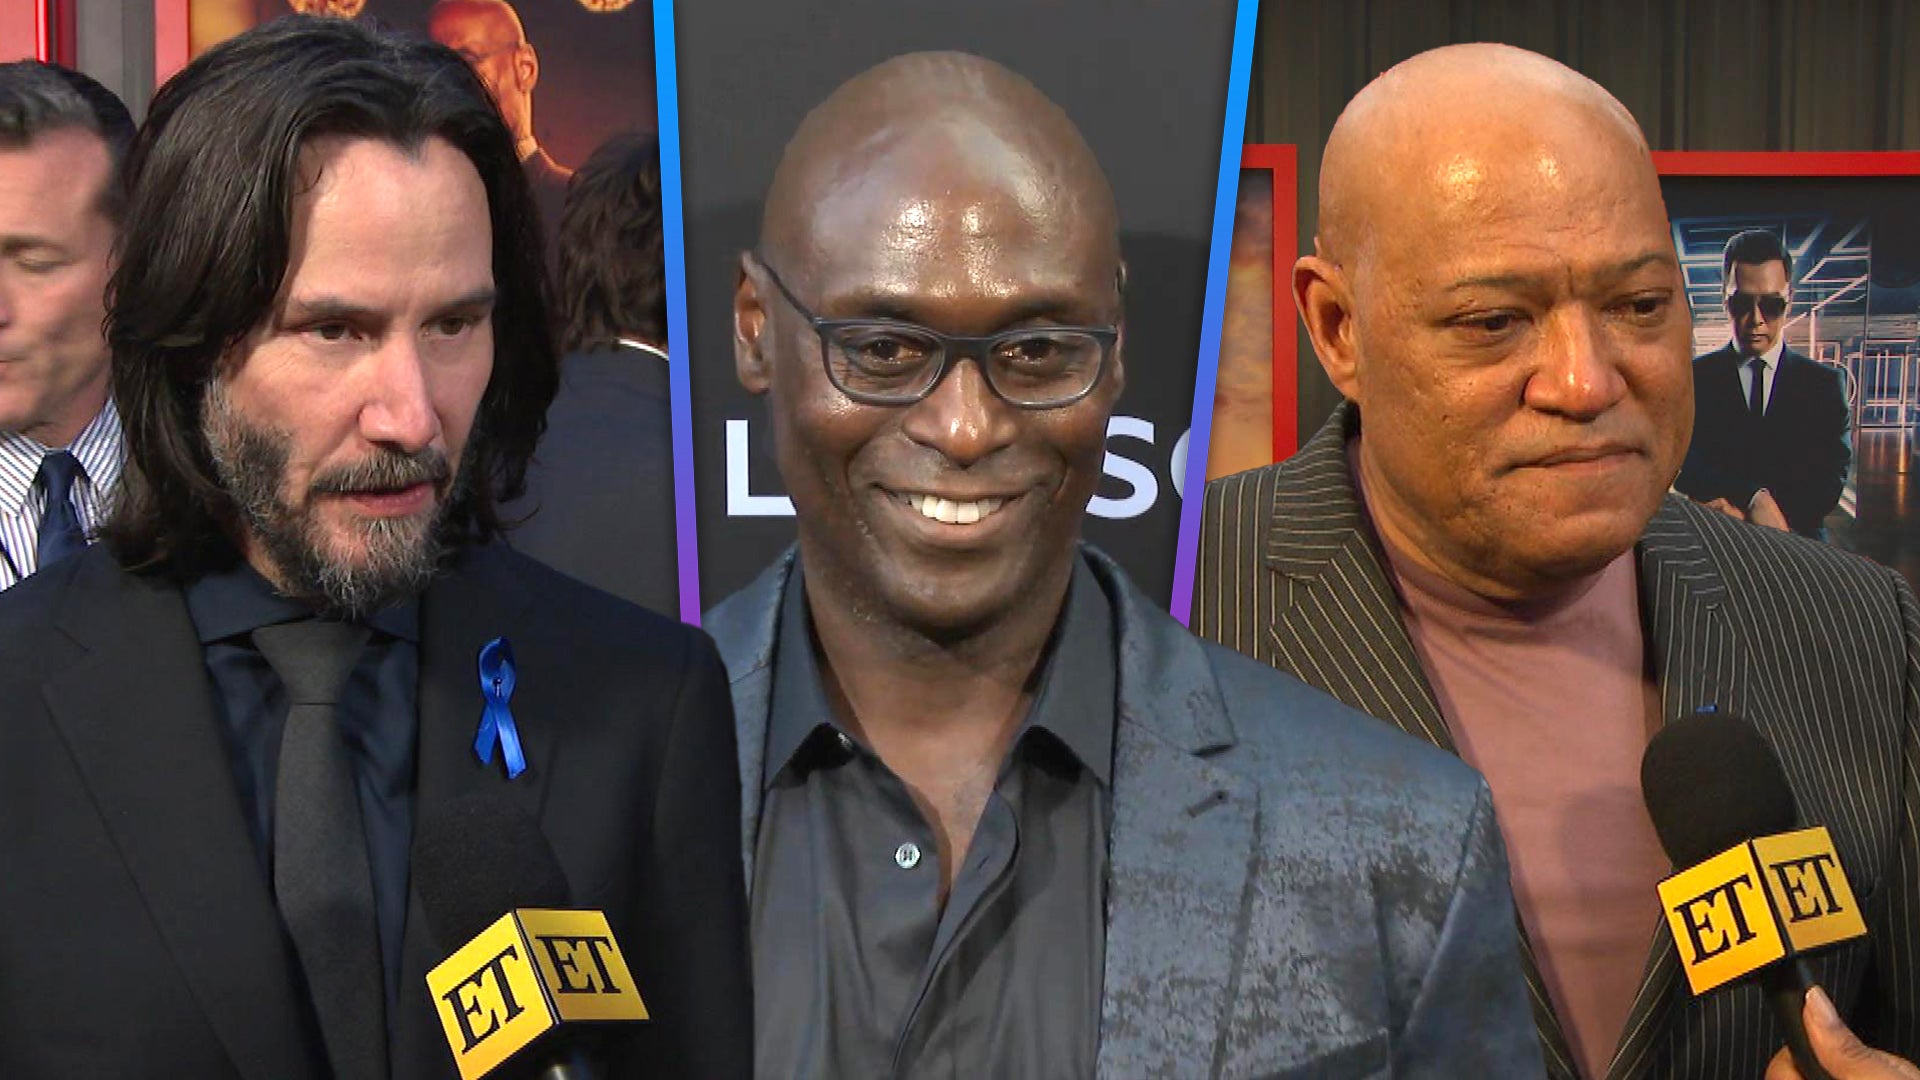 Exclusive: John Wick 4 Stars on Playing Keanu Reeves' Friend and Foe